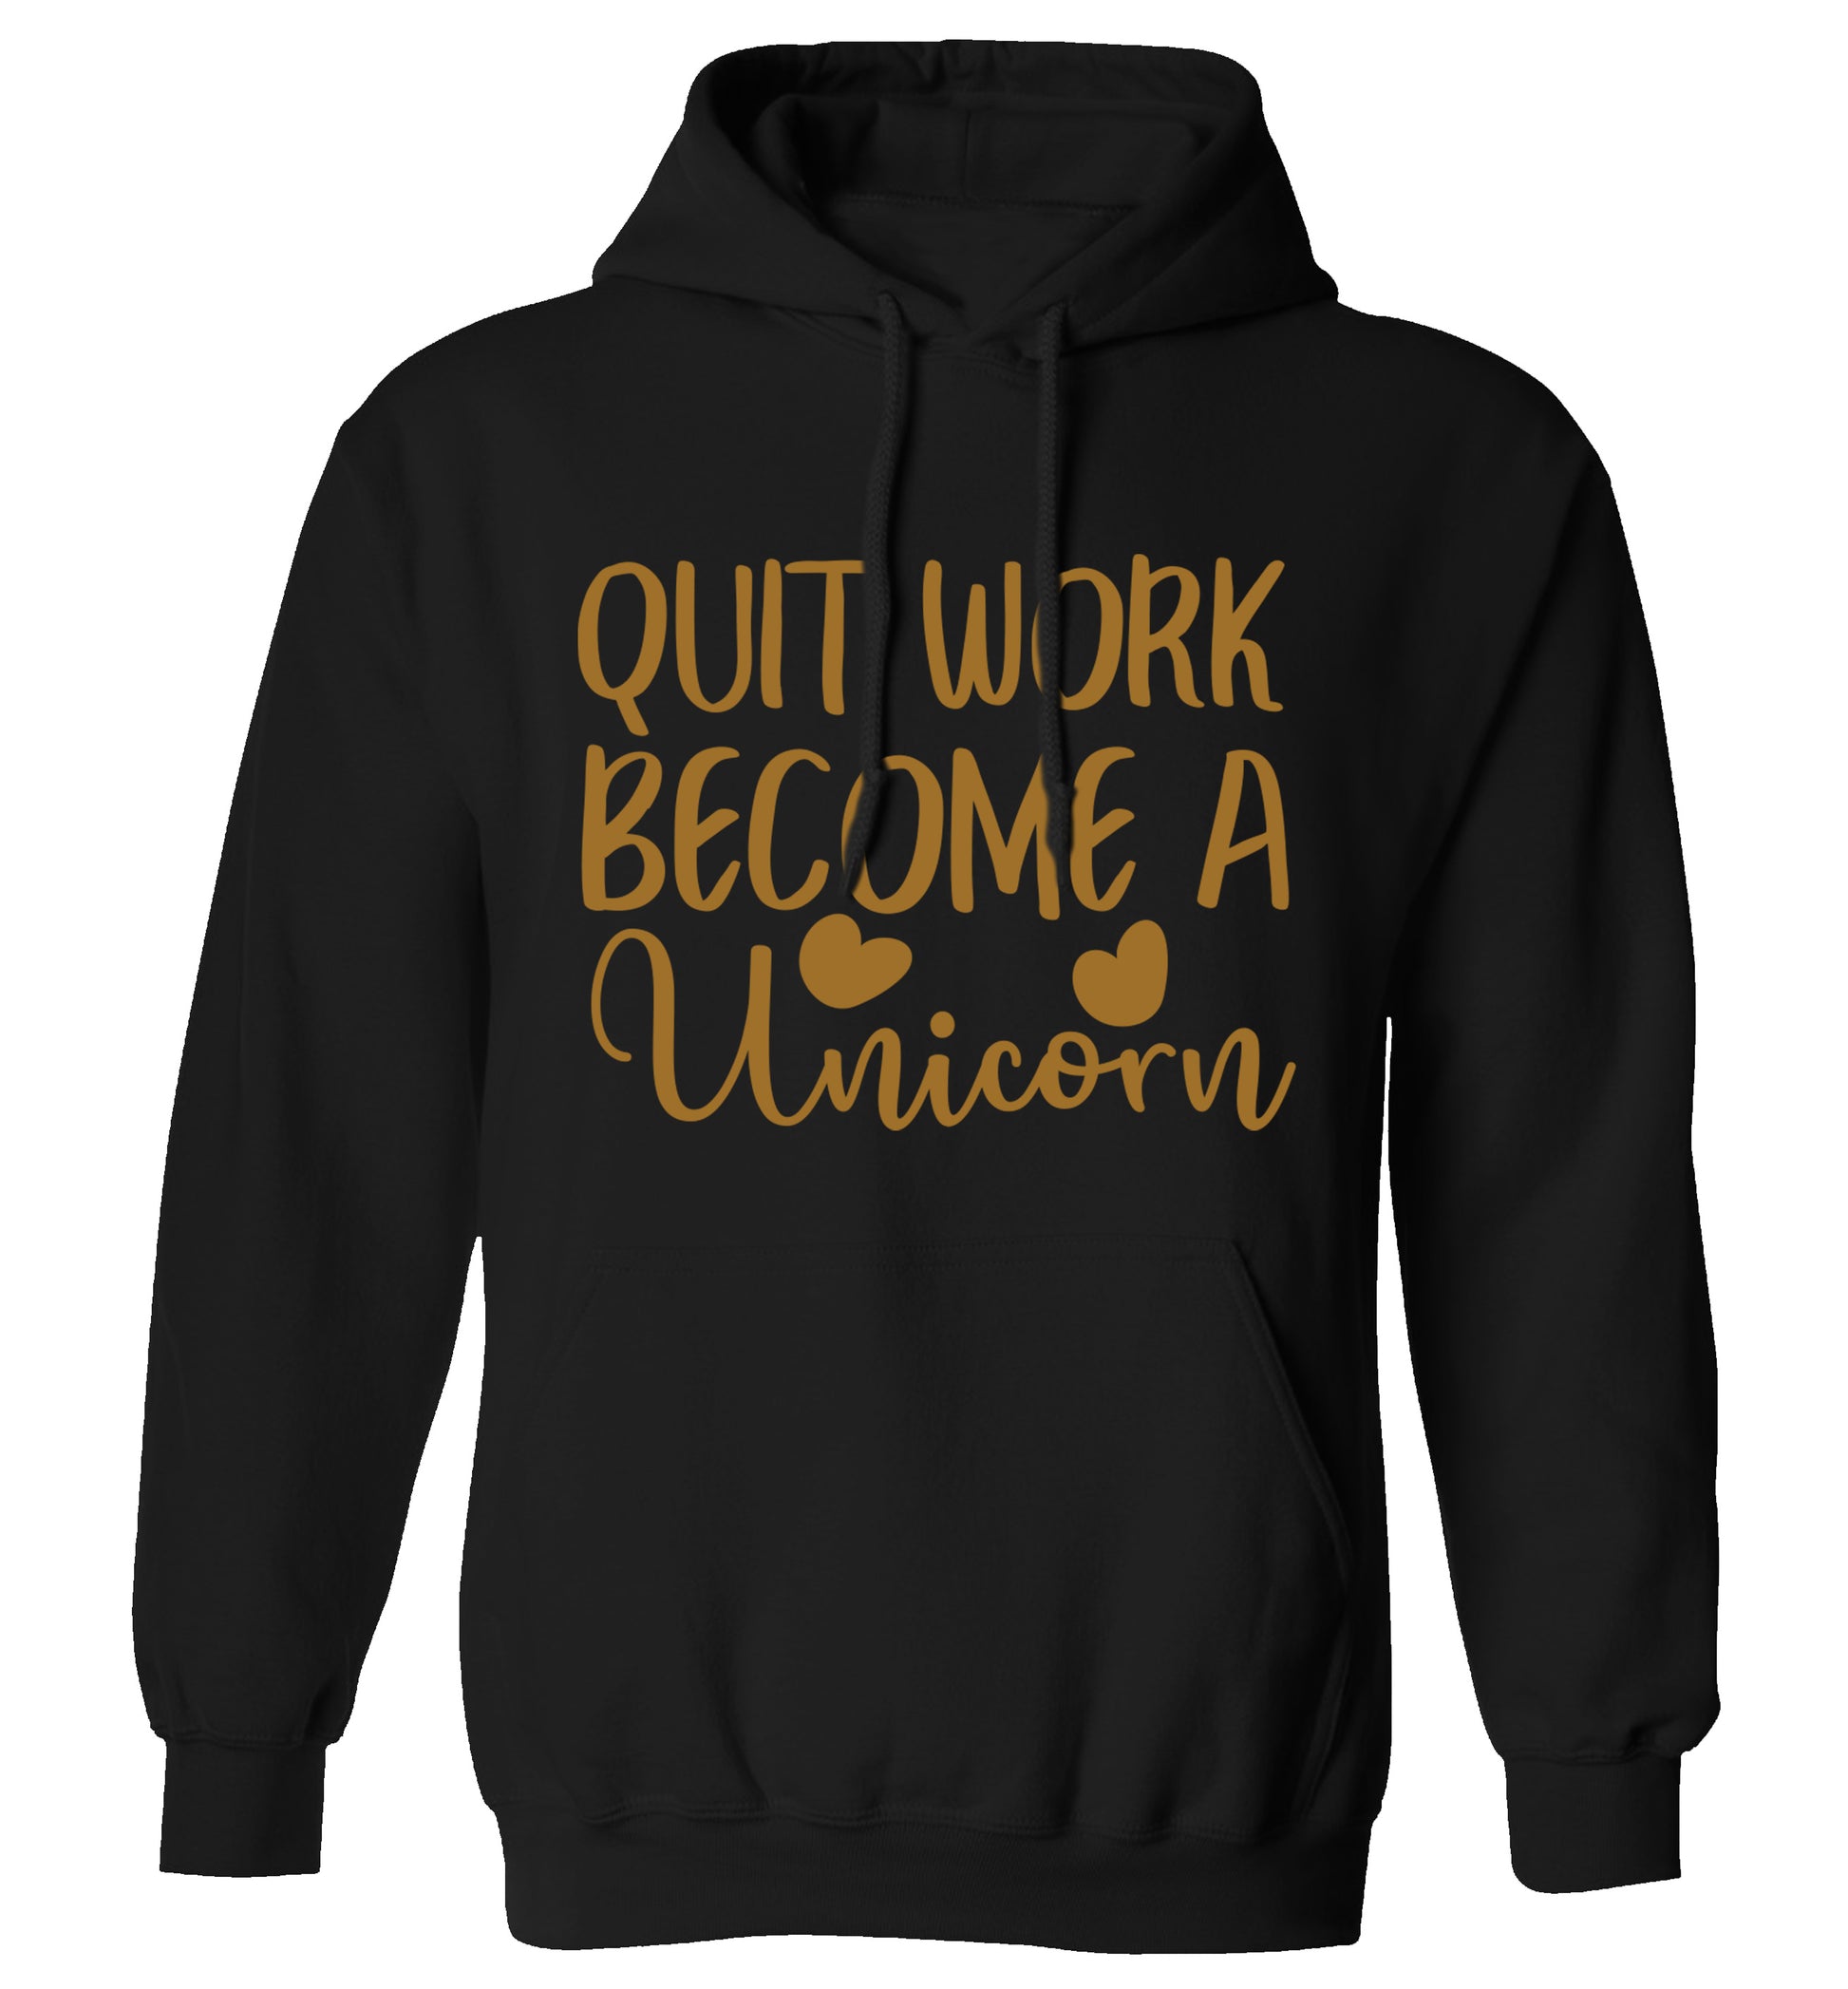 Quit work become a unicorn adults unisex black hoodie 2XL